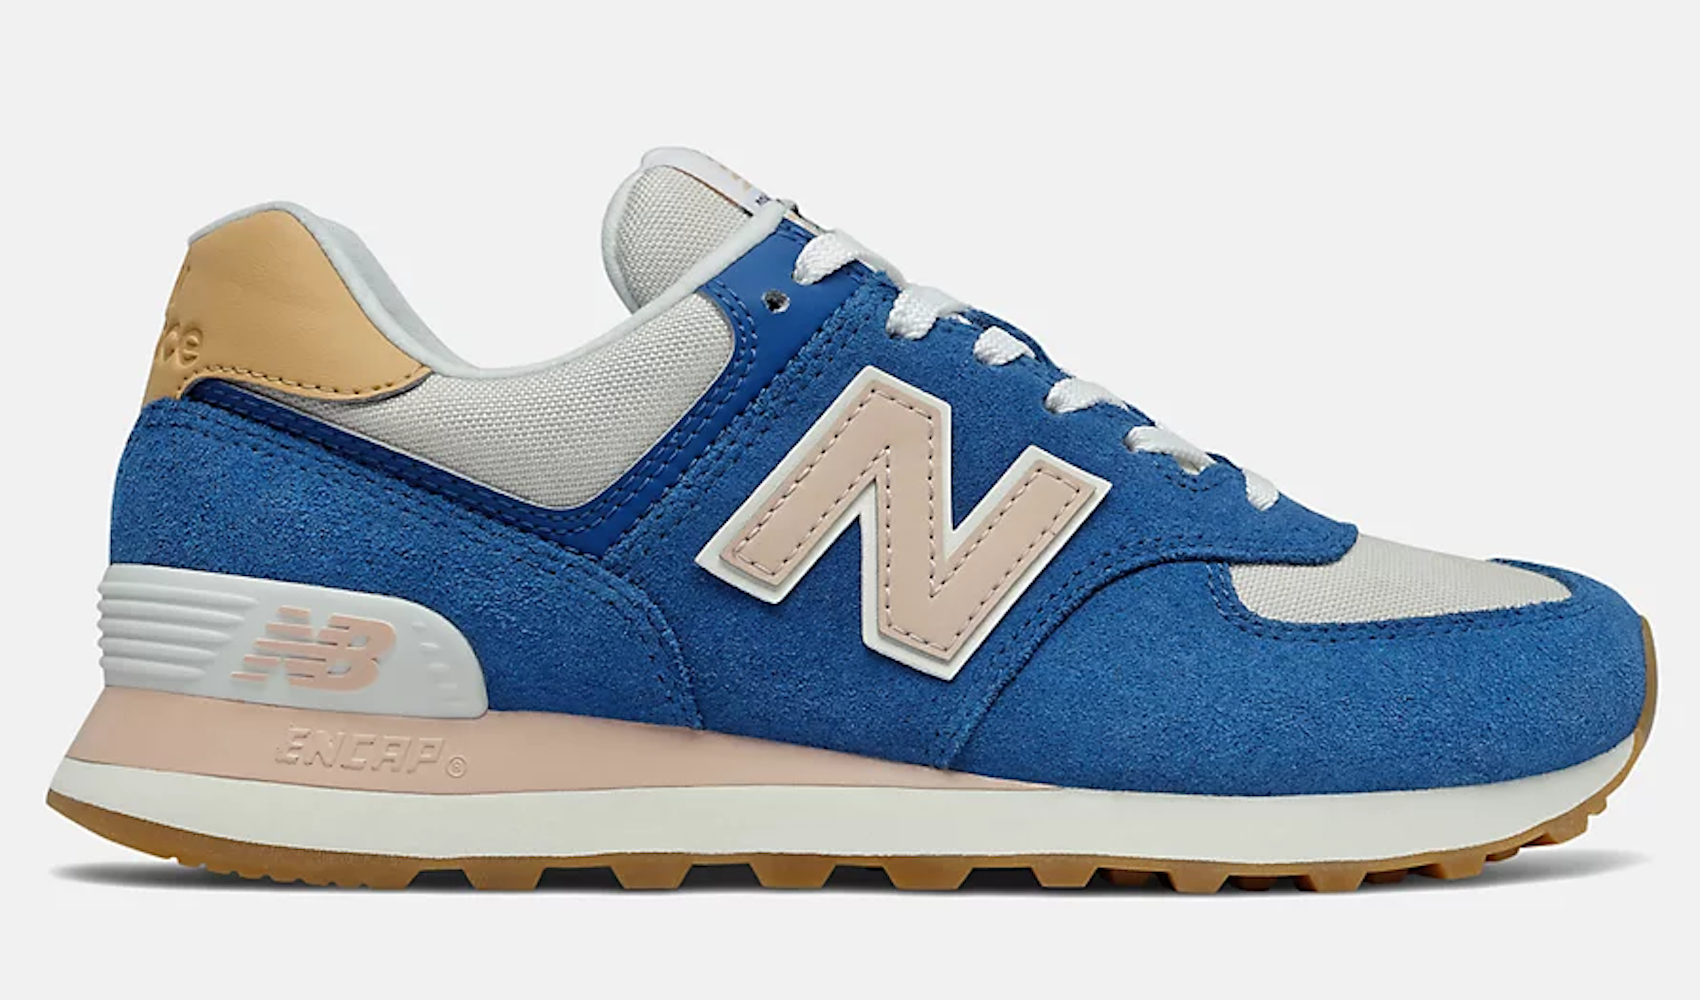 New Balance sneakers in blue.